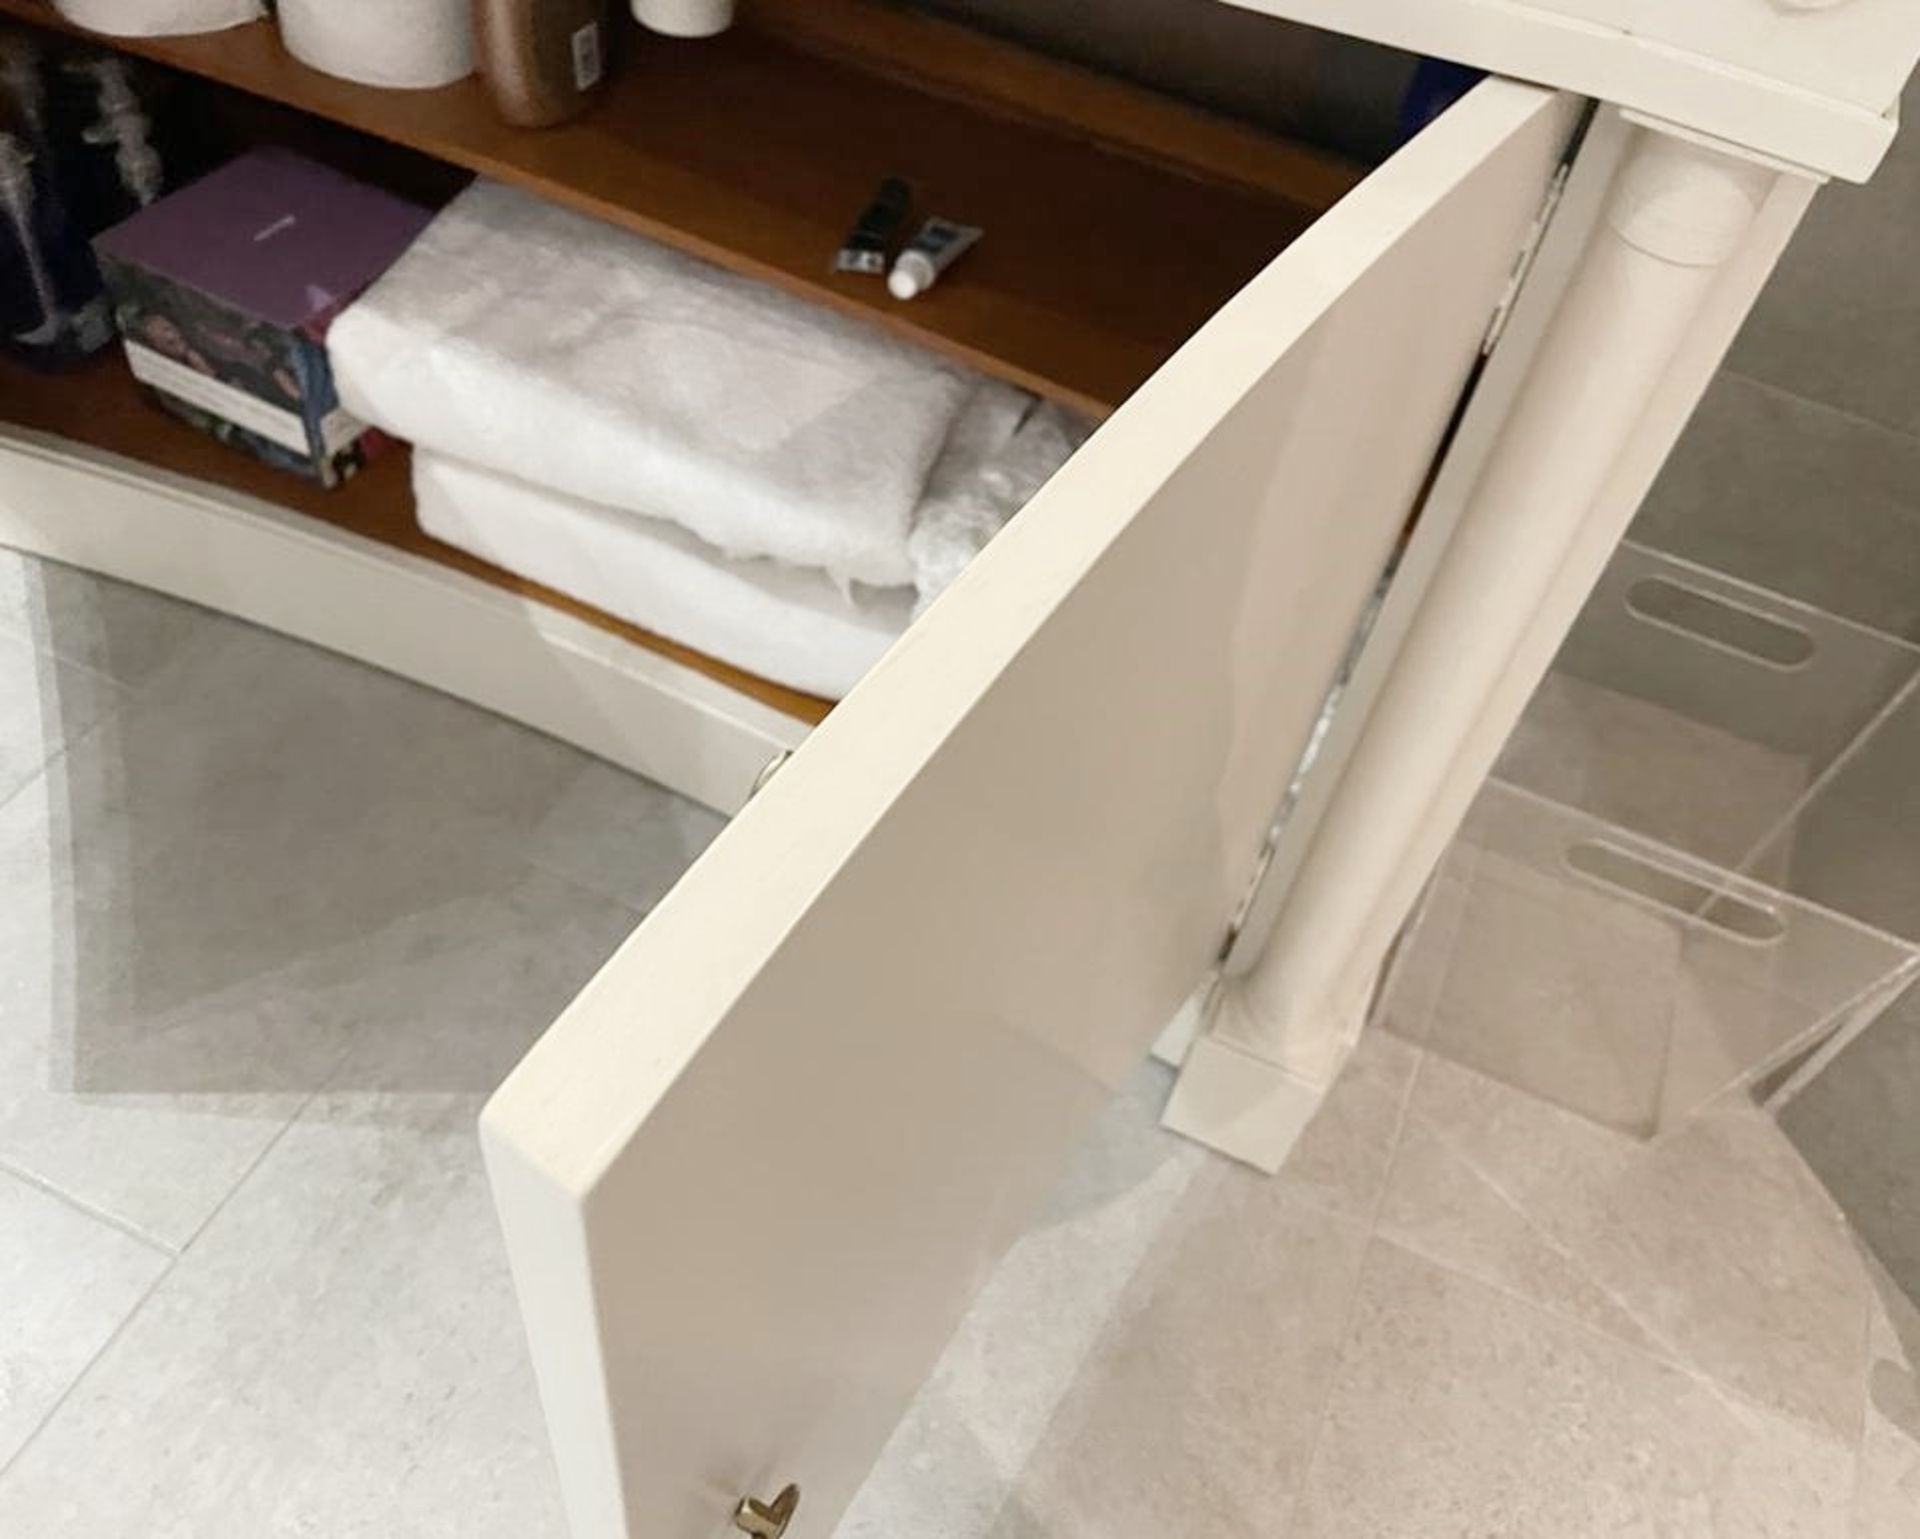 1 x GAMADECOR Luxury Solid Wood, Marble Topped Vanity Unit with a Round Inset Ceramic Sink - - Image 3 of 14